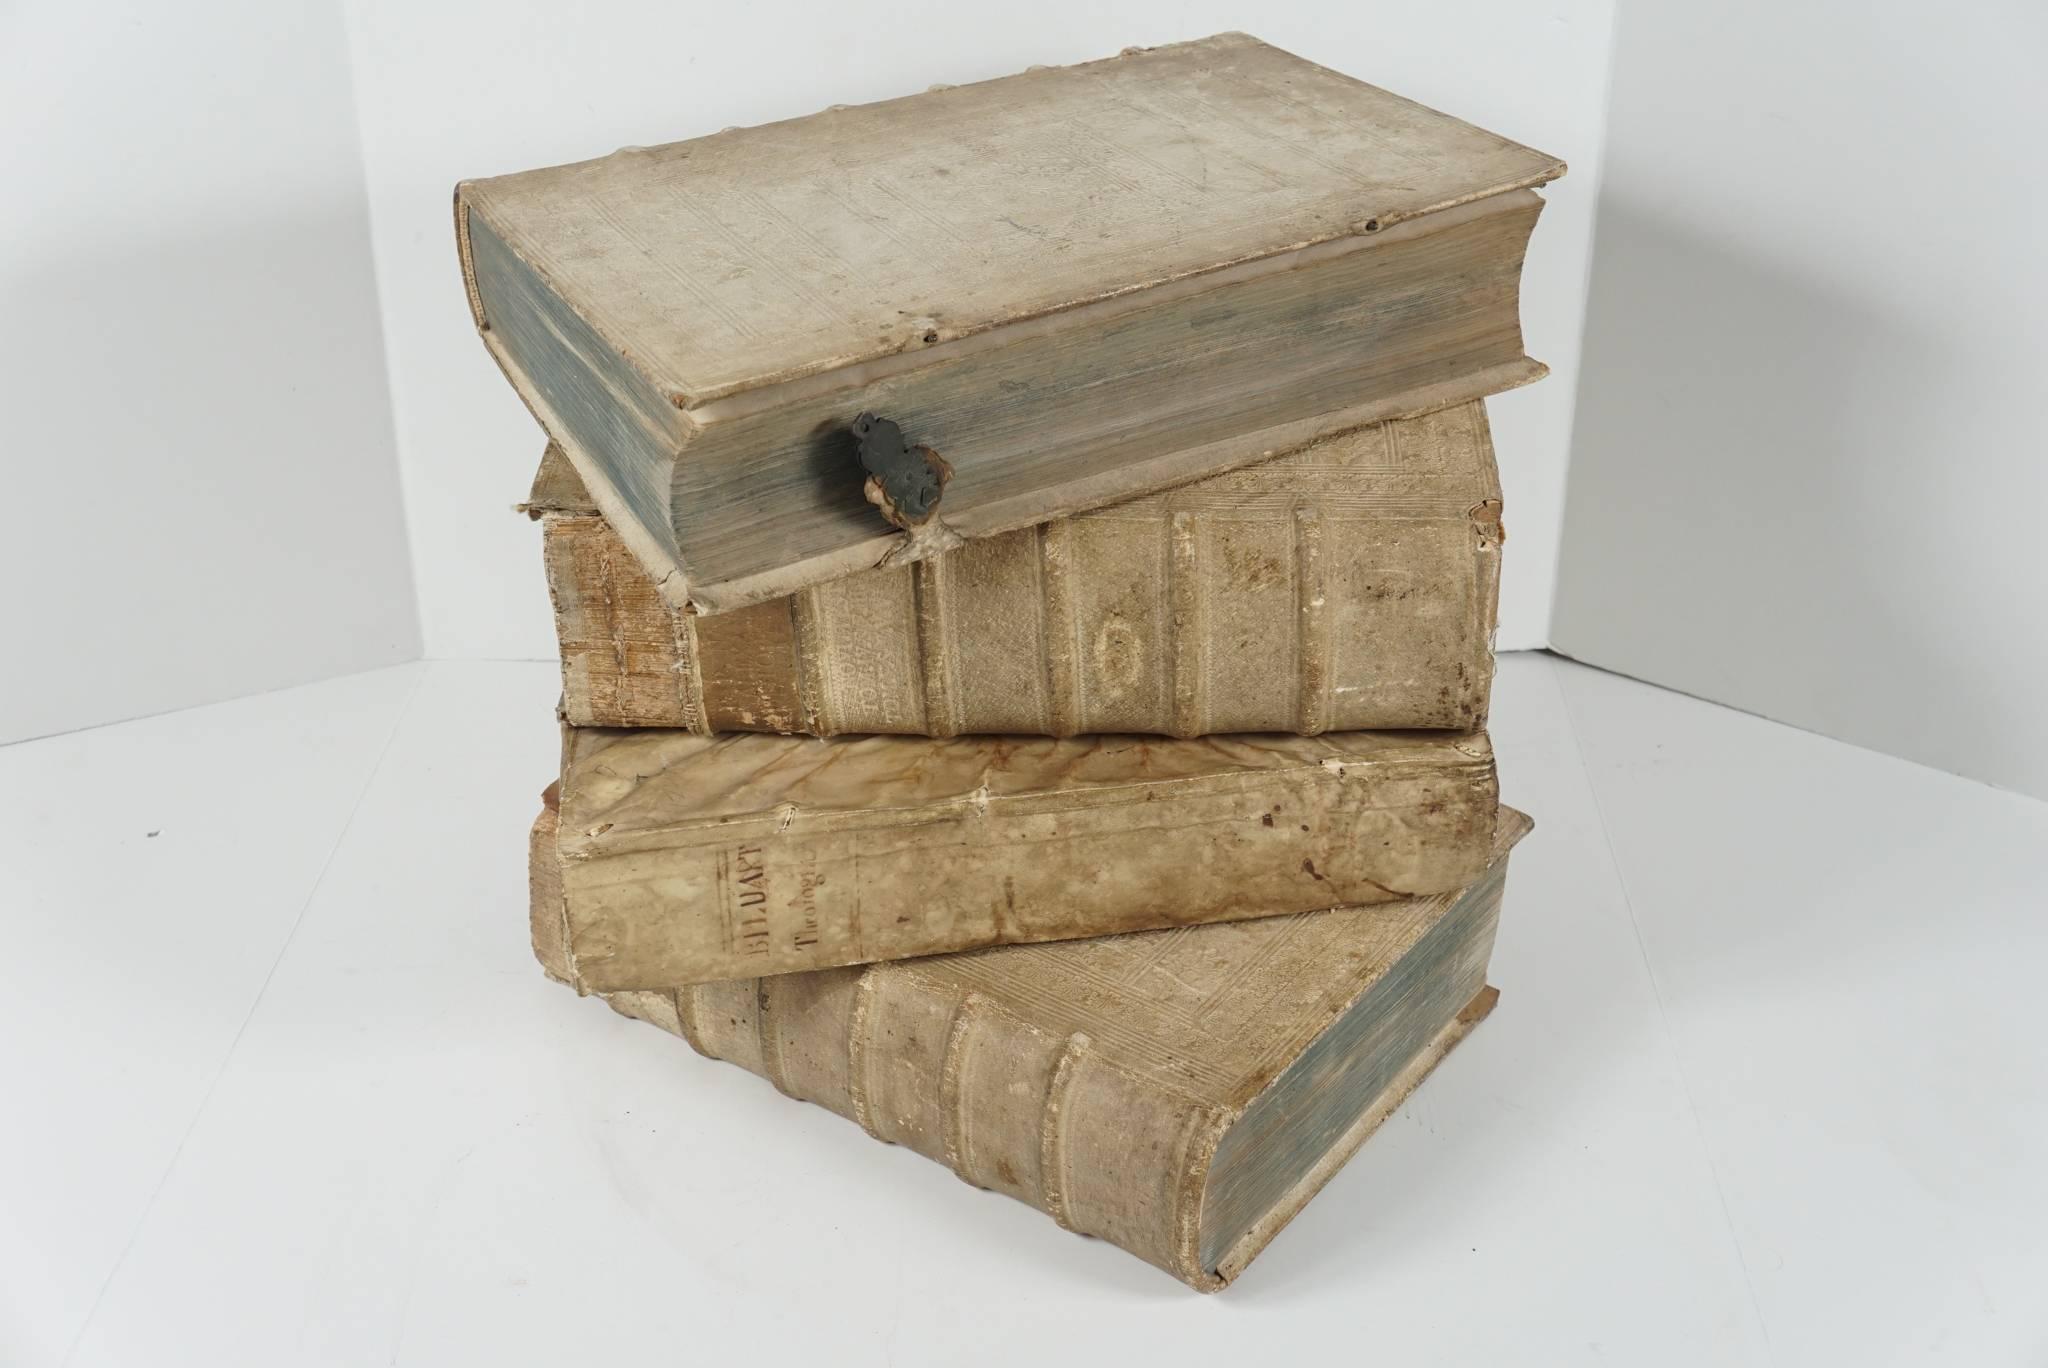 These four books printed in Latin are covered in beautiful old vellum covers and spines. Each book contains text, margin commentary and pictorial illustration to the fronts pages. All but one is from the same library with like beautifully embossed